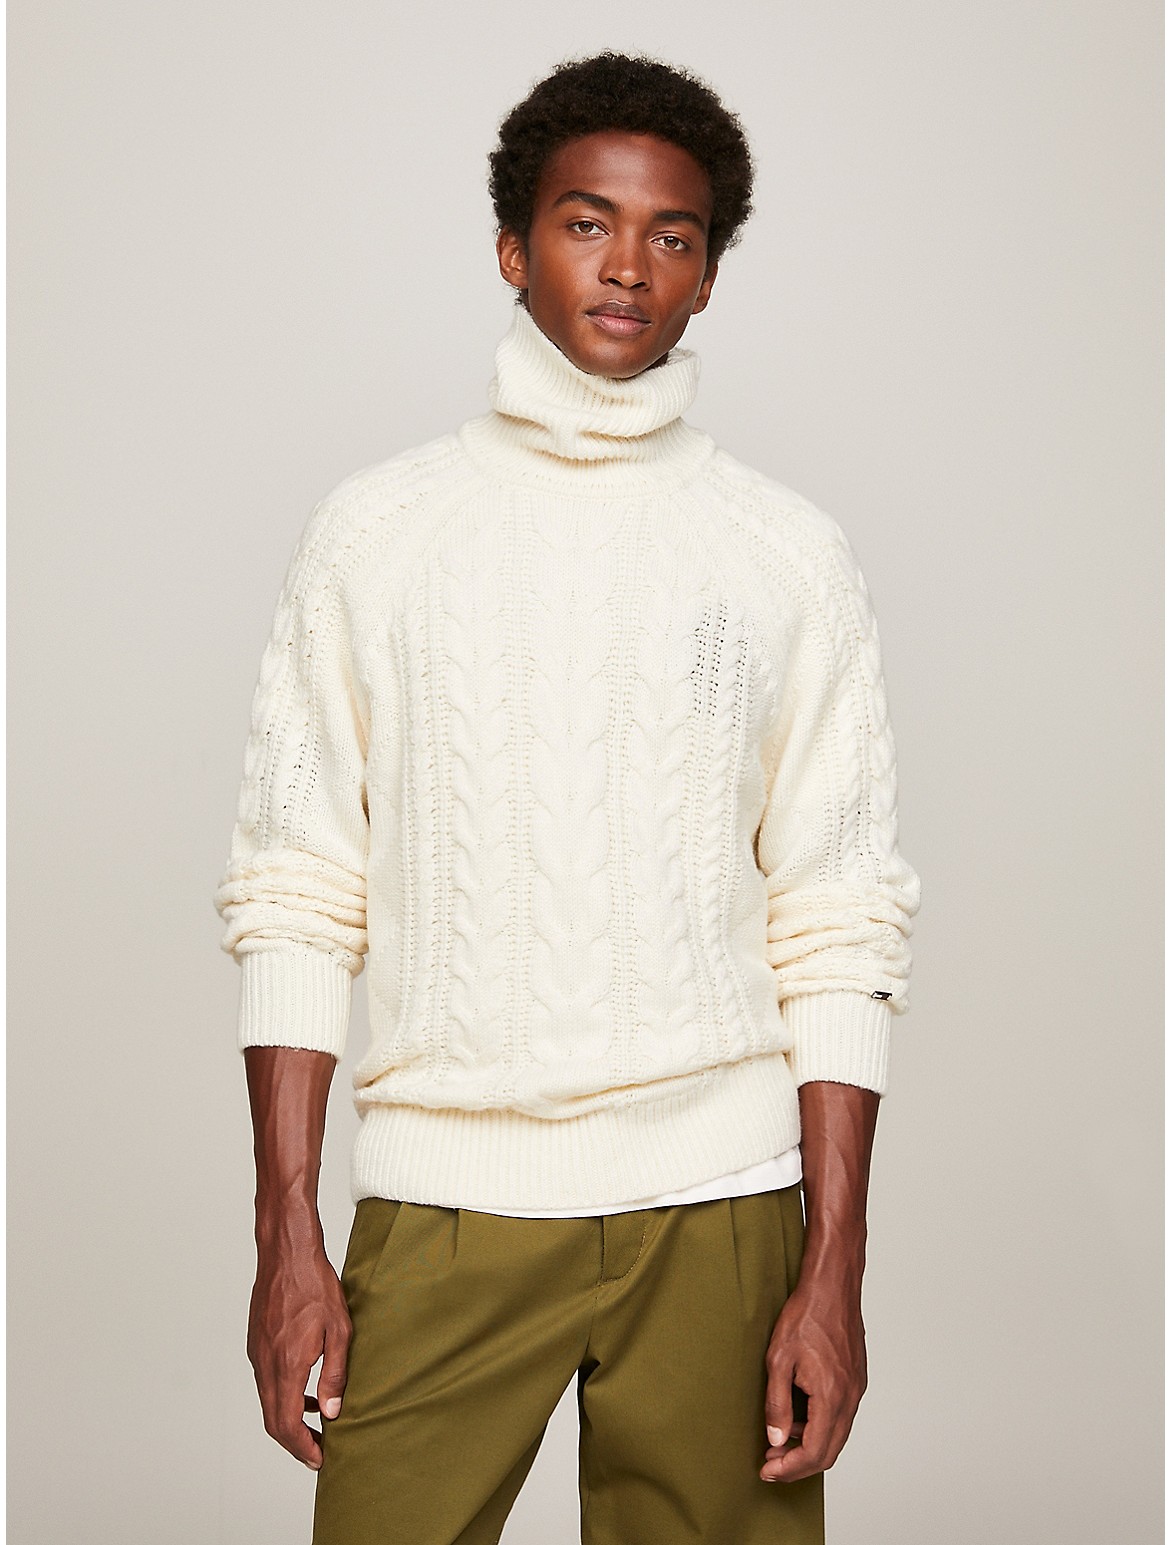 Tommy Hilfiger Men's Relaxed Fit Cable Knit Turtleneck